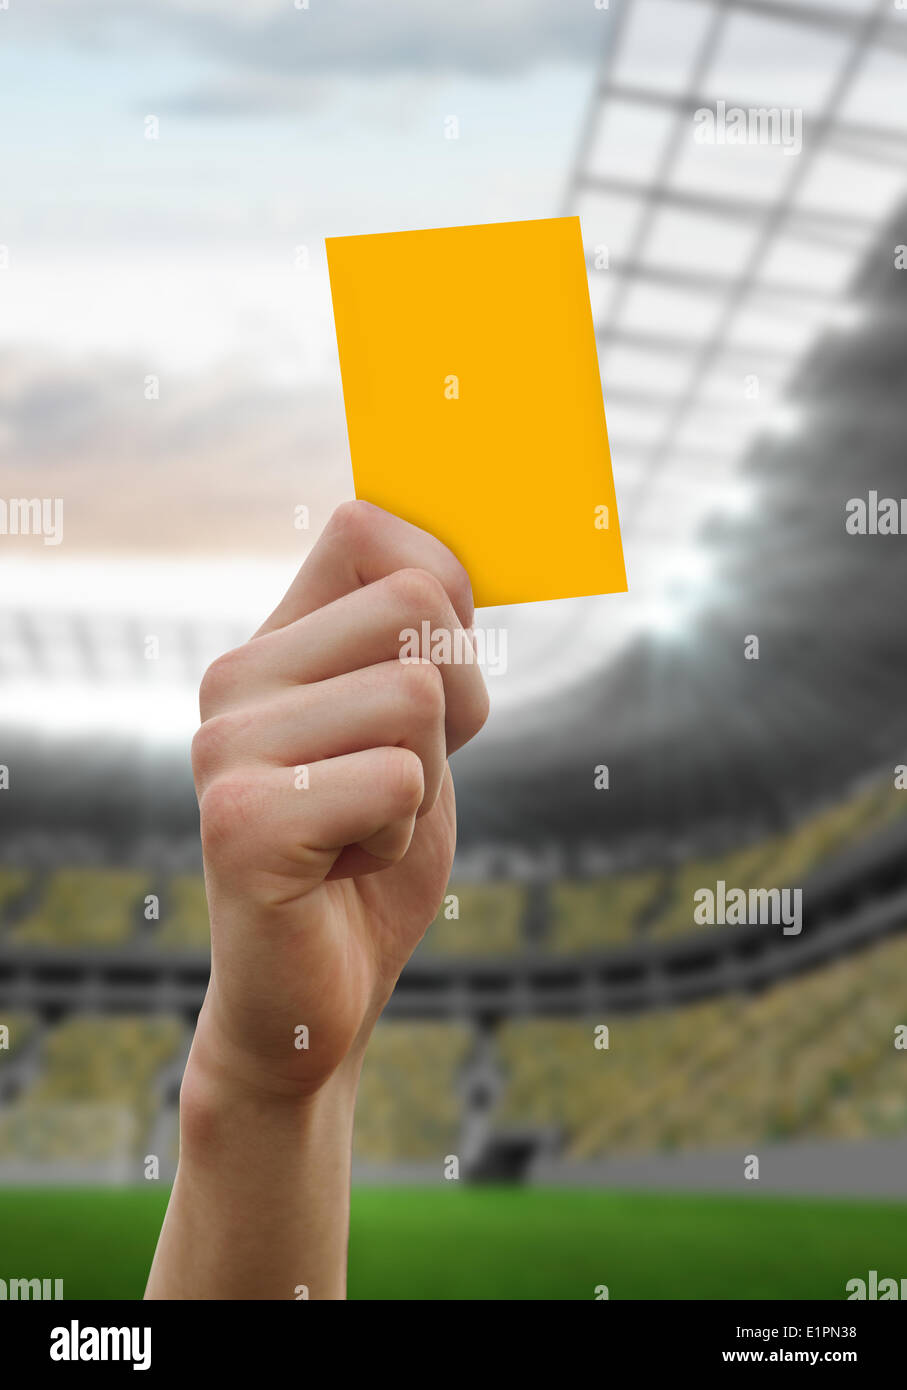 Composite image of hand holding up yellow card Stock Photo